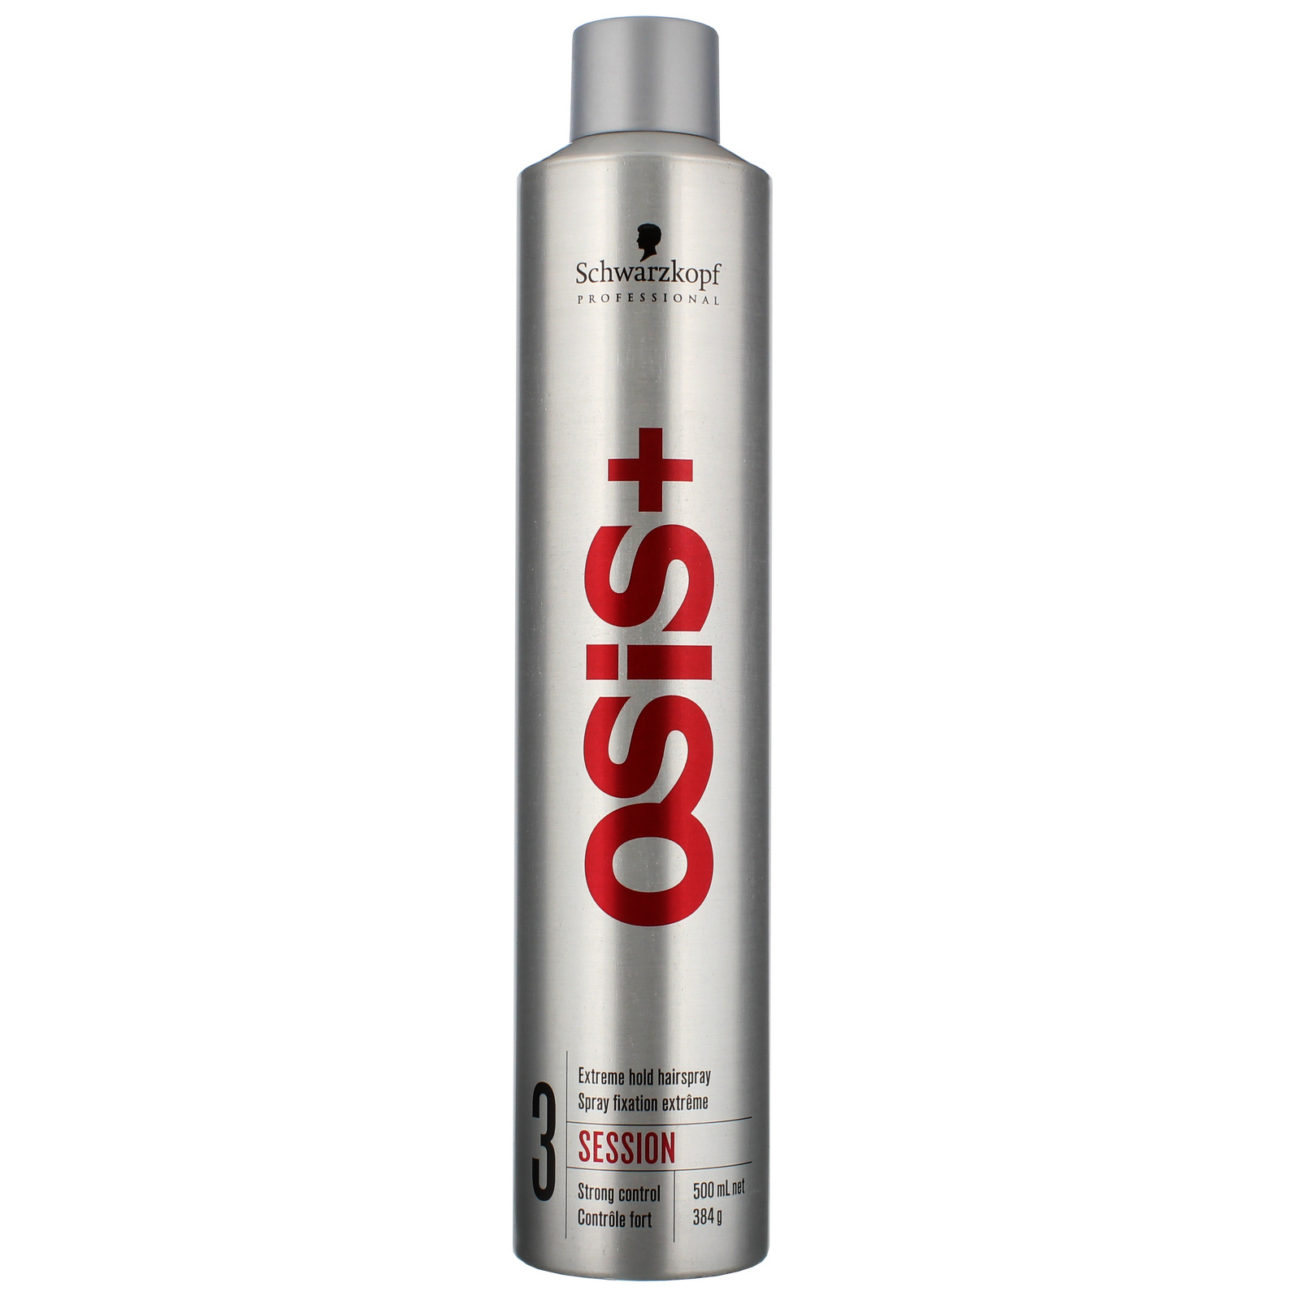 Schwarzkopf Professional Osis Session Extreme Hold Hairspray 300 ml